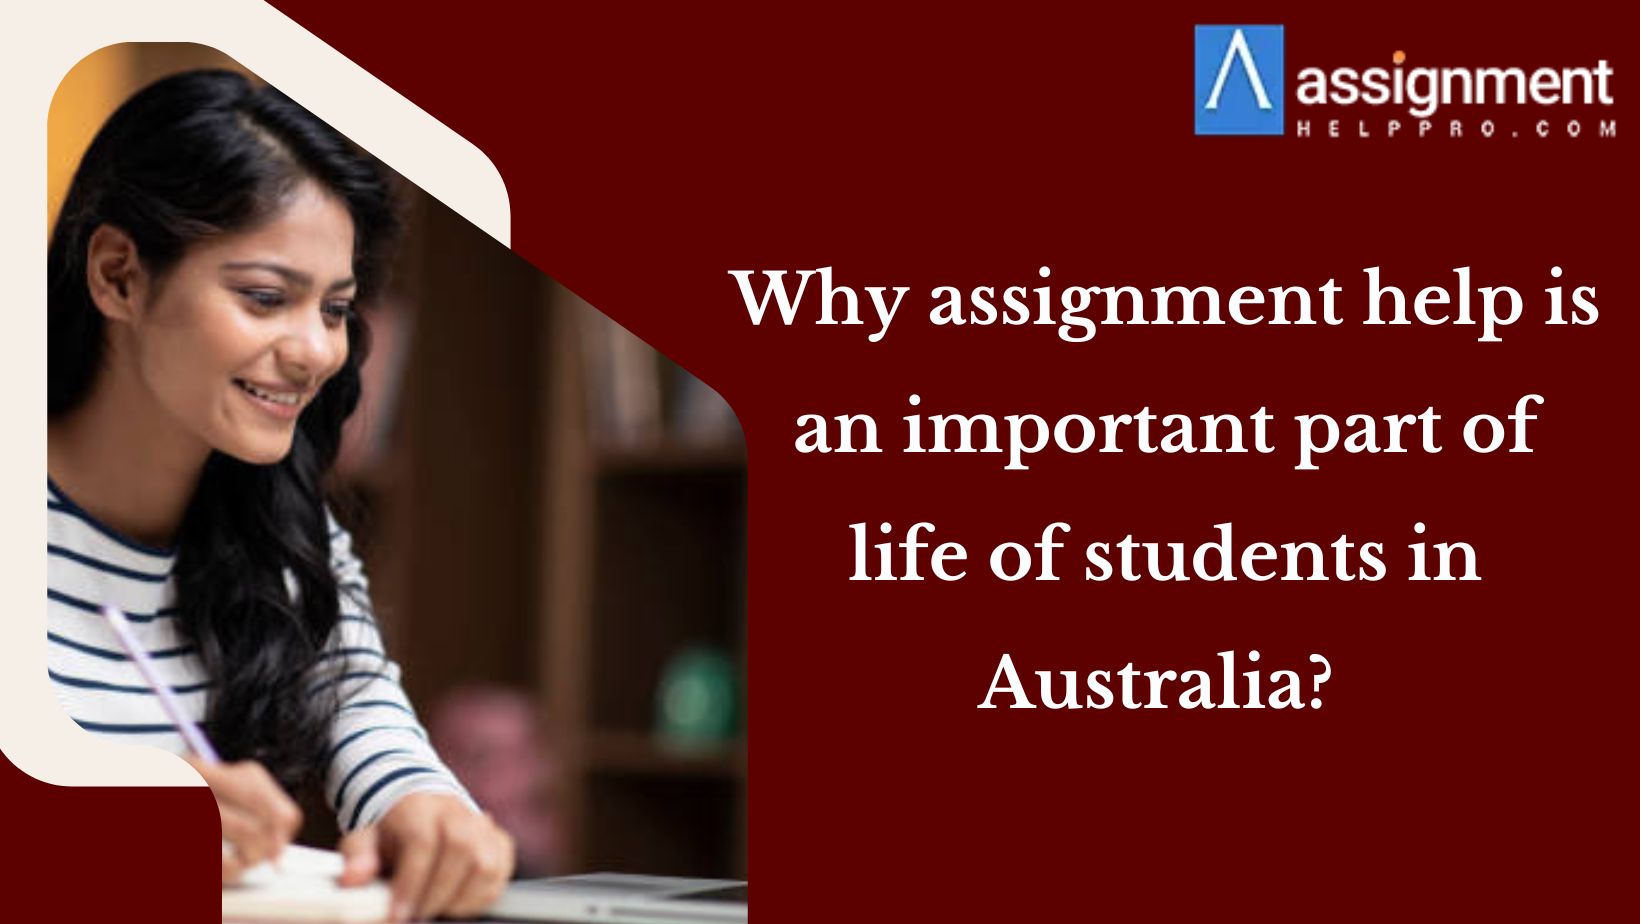 Why assignment help is an important part of life of students in Australia? – Assignment help Australia